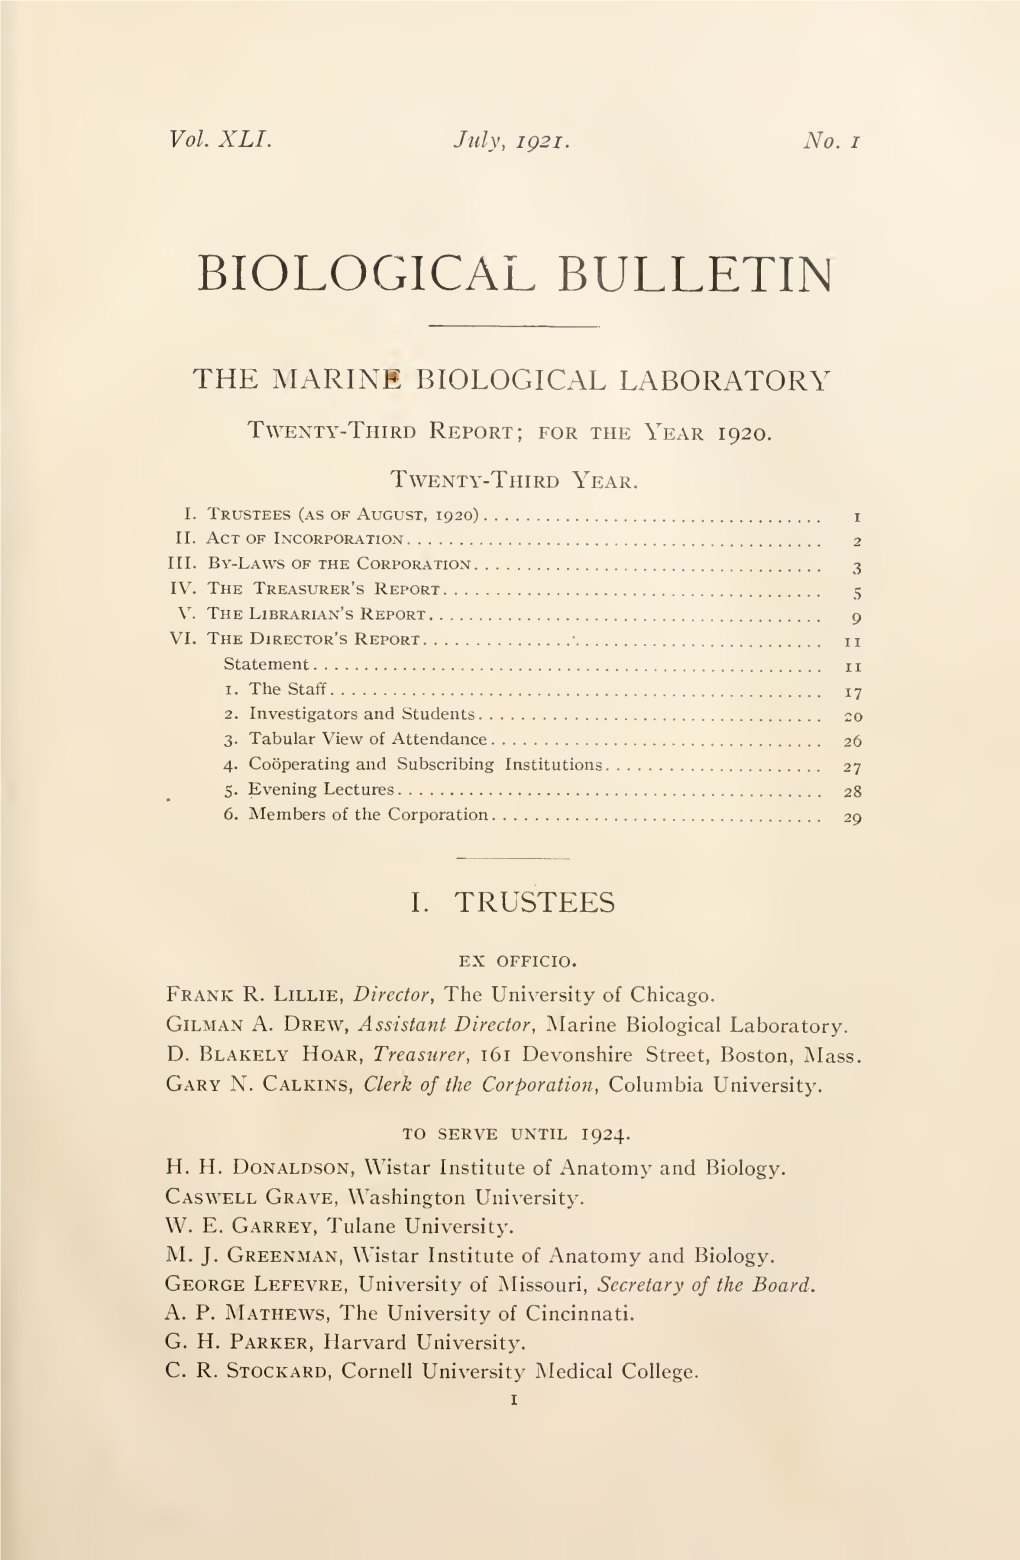 The BIOLOGICAL BULLETIN, and 32 Were Gifts